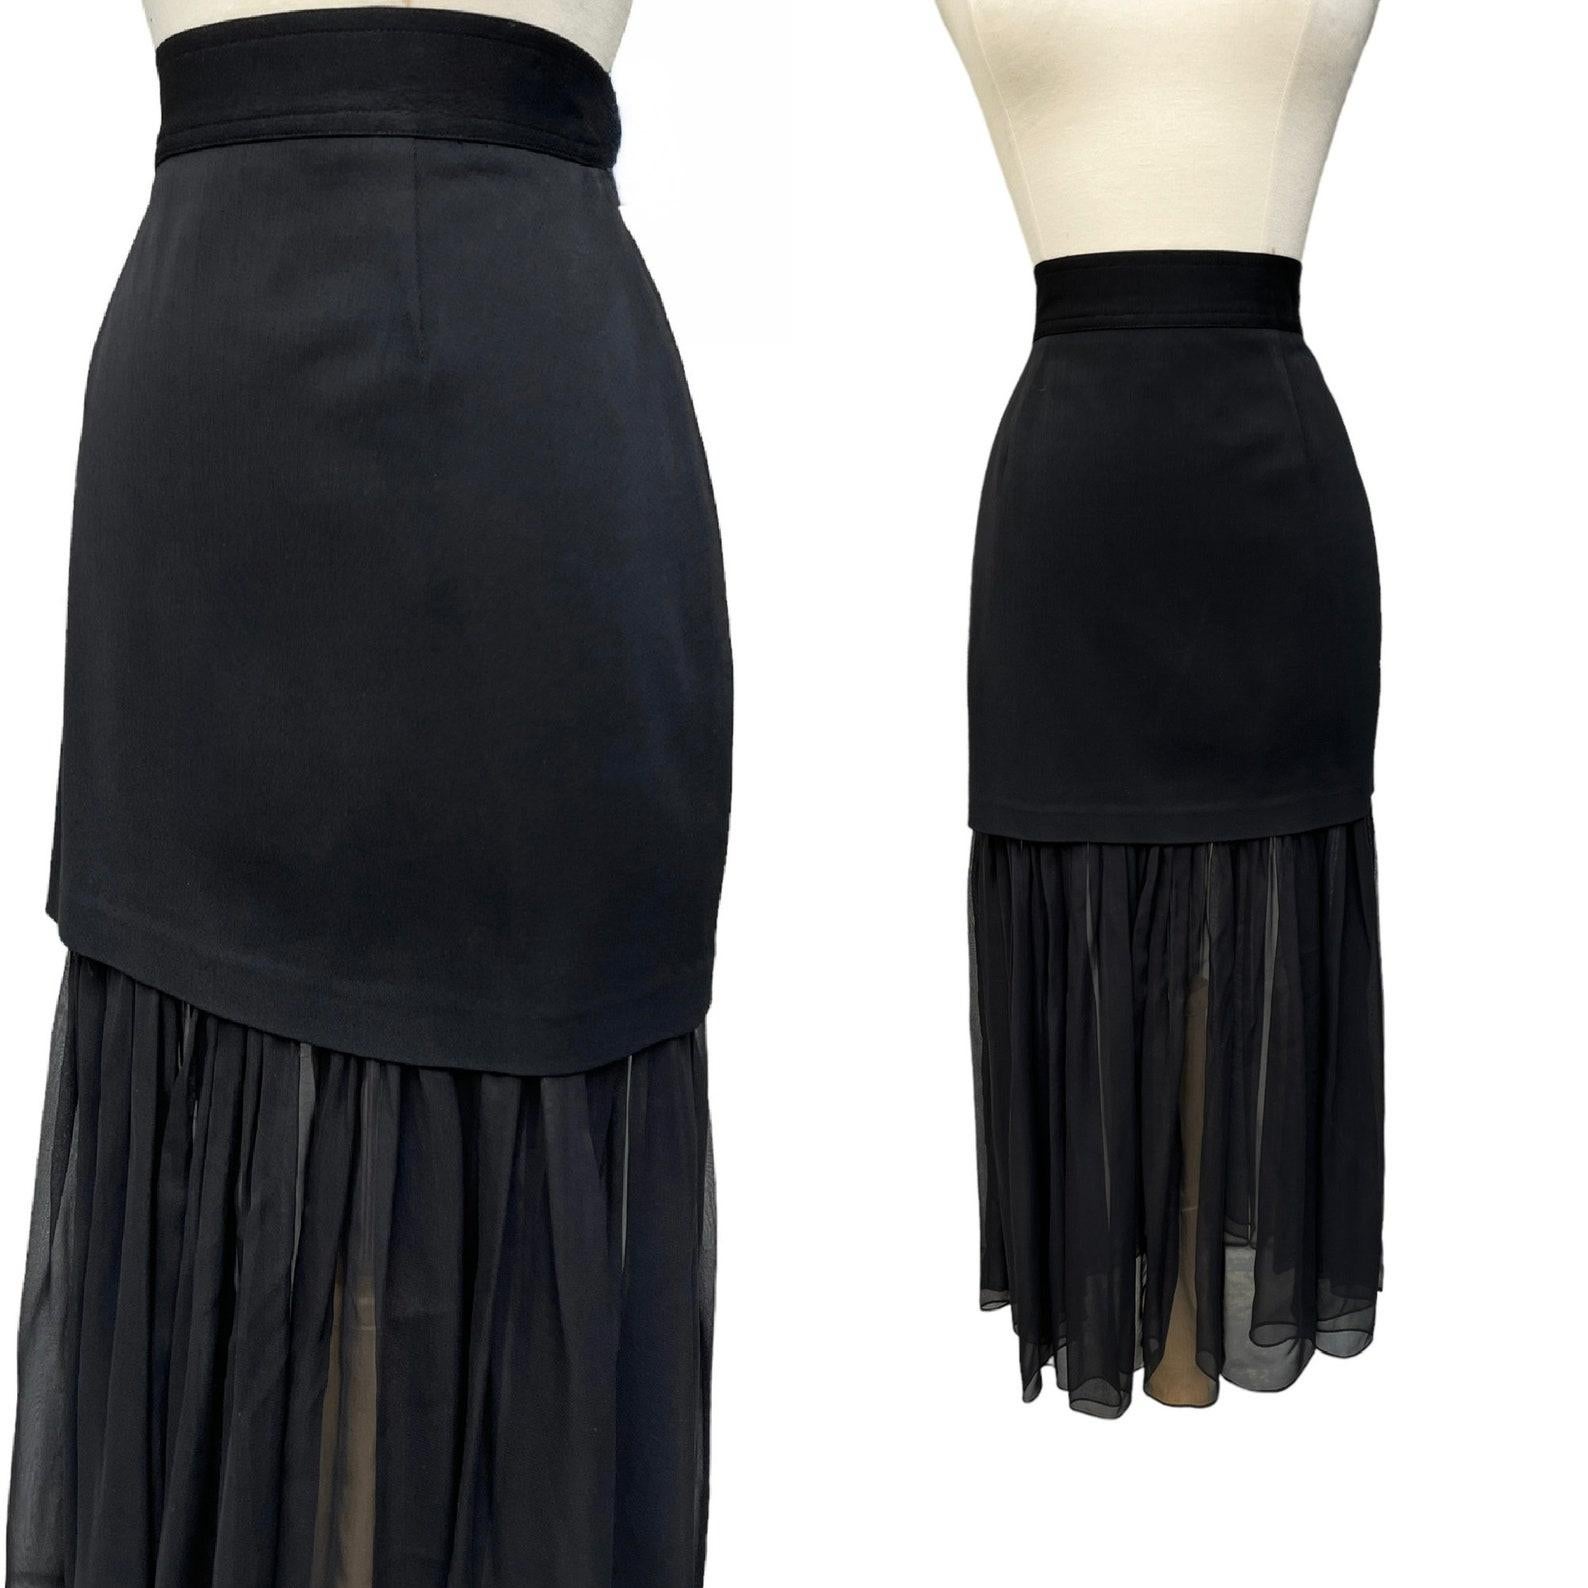 vintage black high waist skirt. mini length solid rayon with attached flowy sheer silk chiffon hem. fitted waist. single button + zip closure at back waist. dry cleaned.

Circa 1990s
Gemma Kahng New York
Made in the USA
Tagged Size